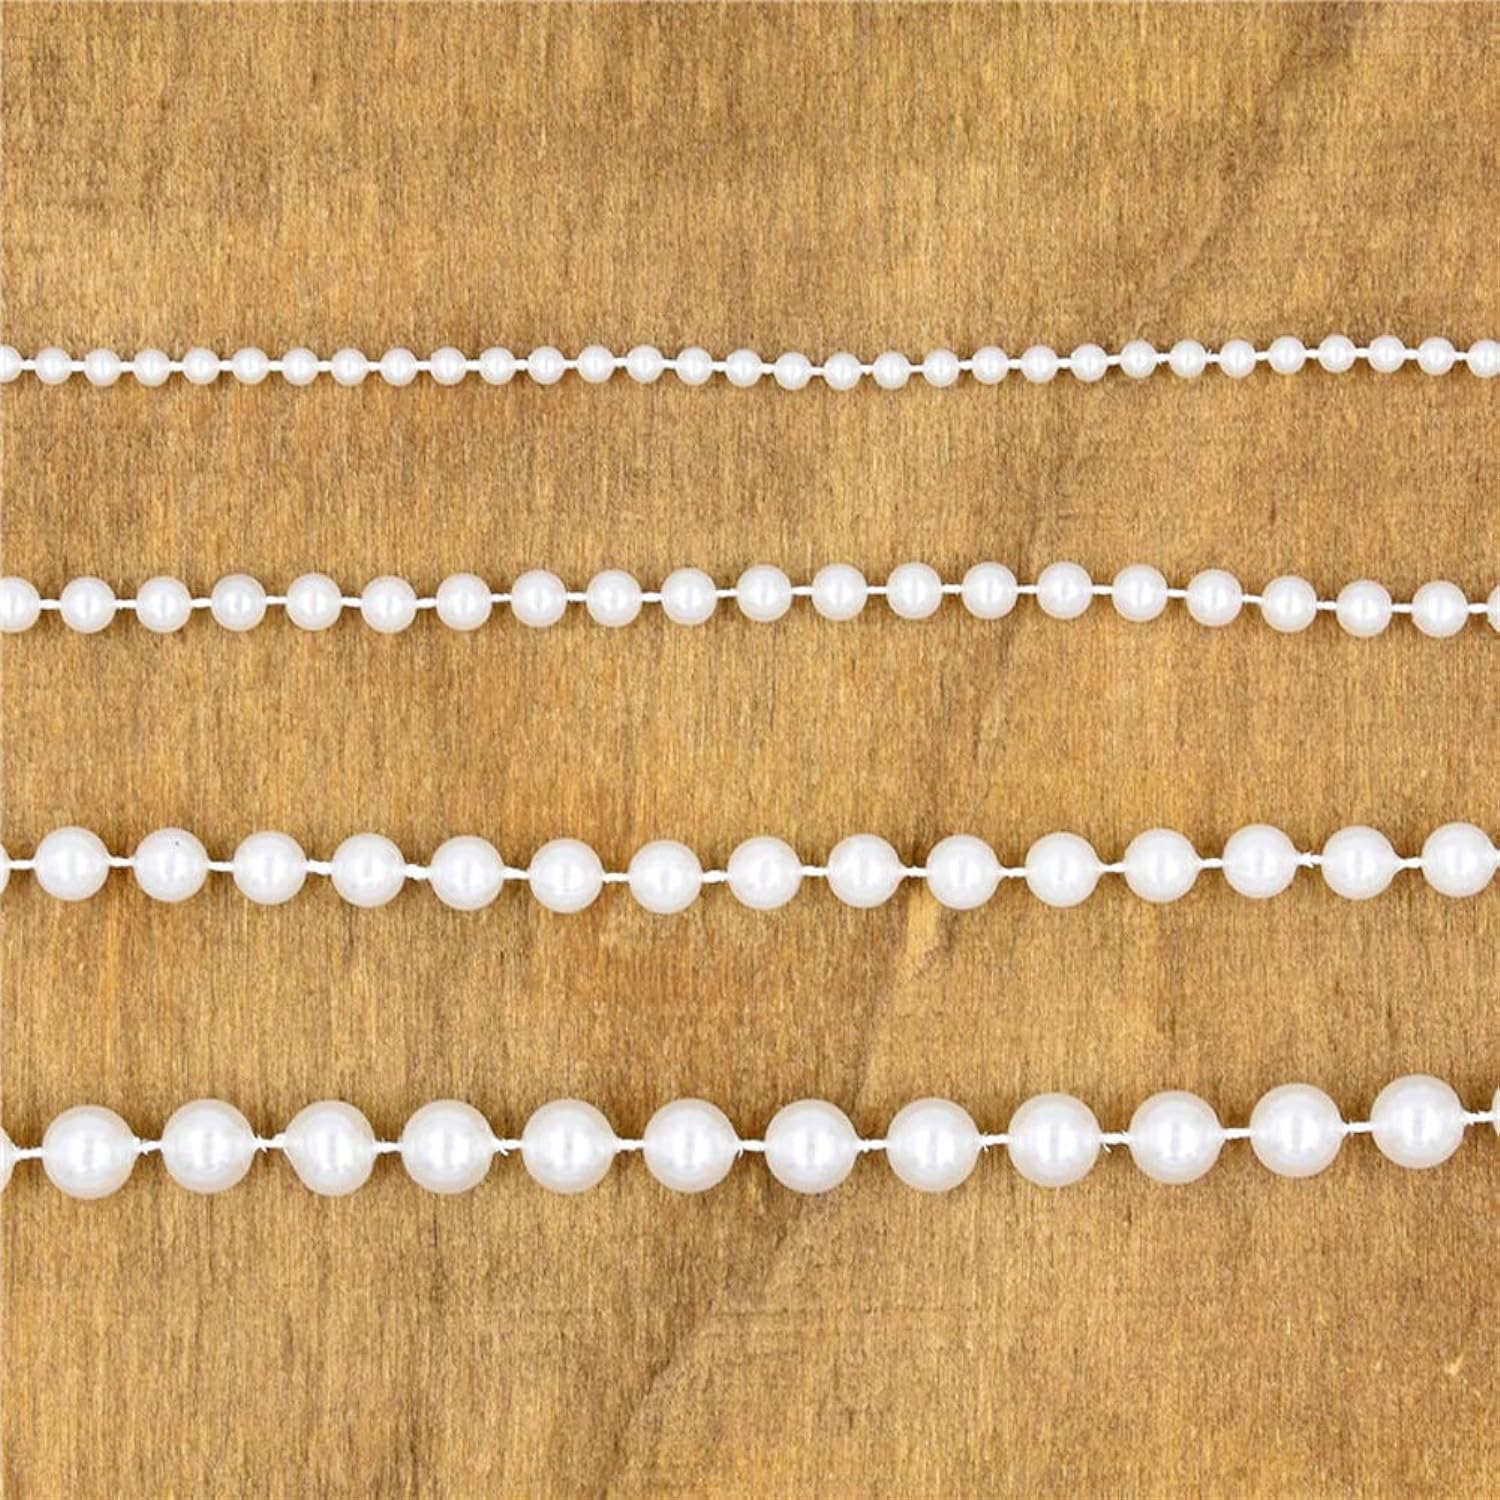 Great Choice Products 1Roll 6Mm Faux Pearl Bead Garland Beads Pearl Chain Pearl Strands String For Wedding Party Decoration Diy Crafts Project, …